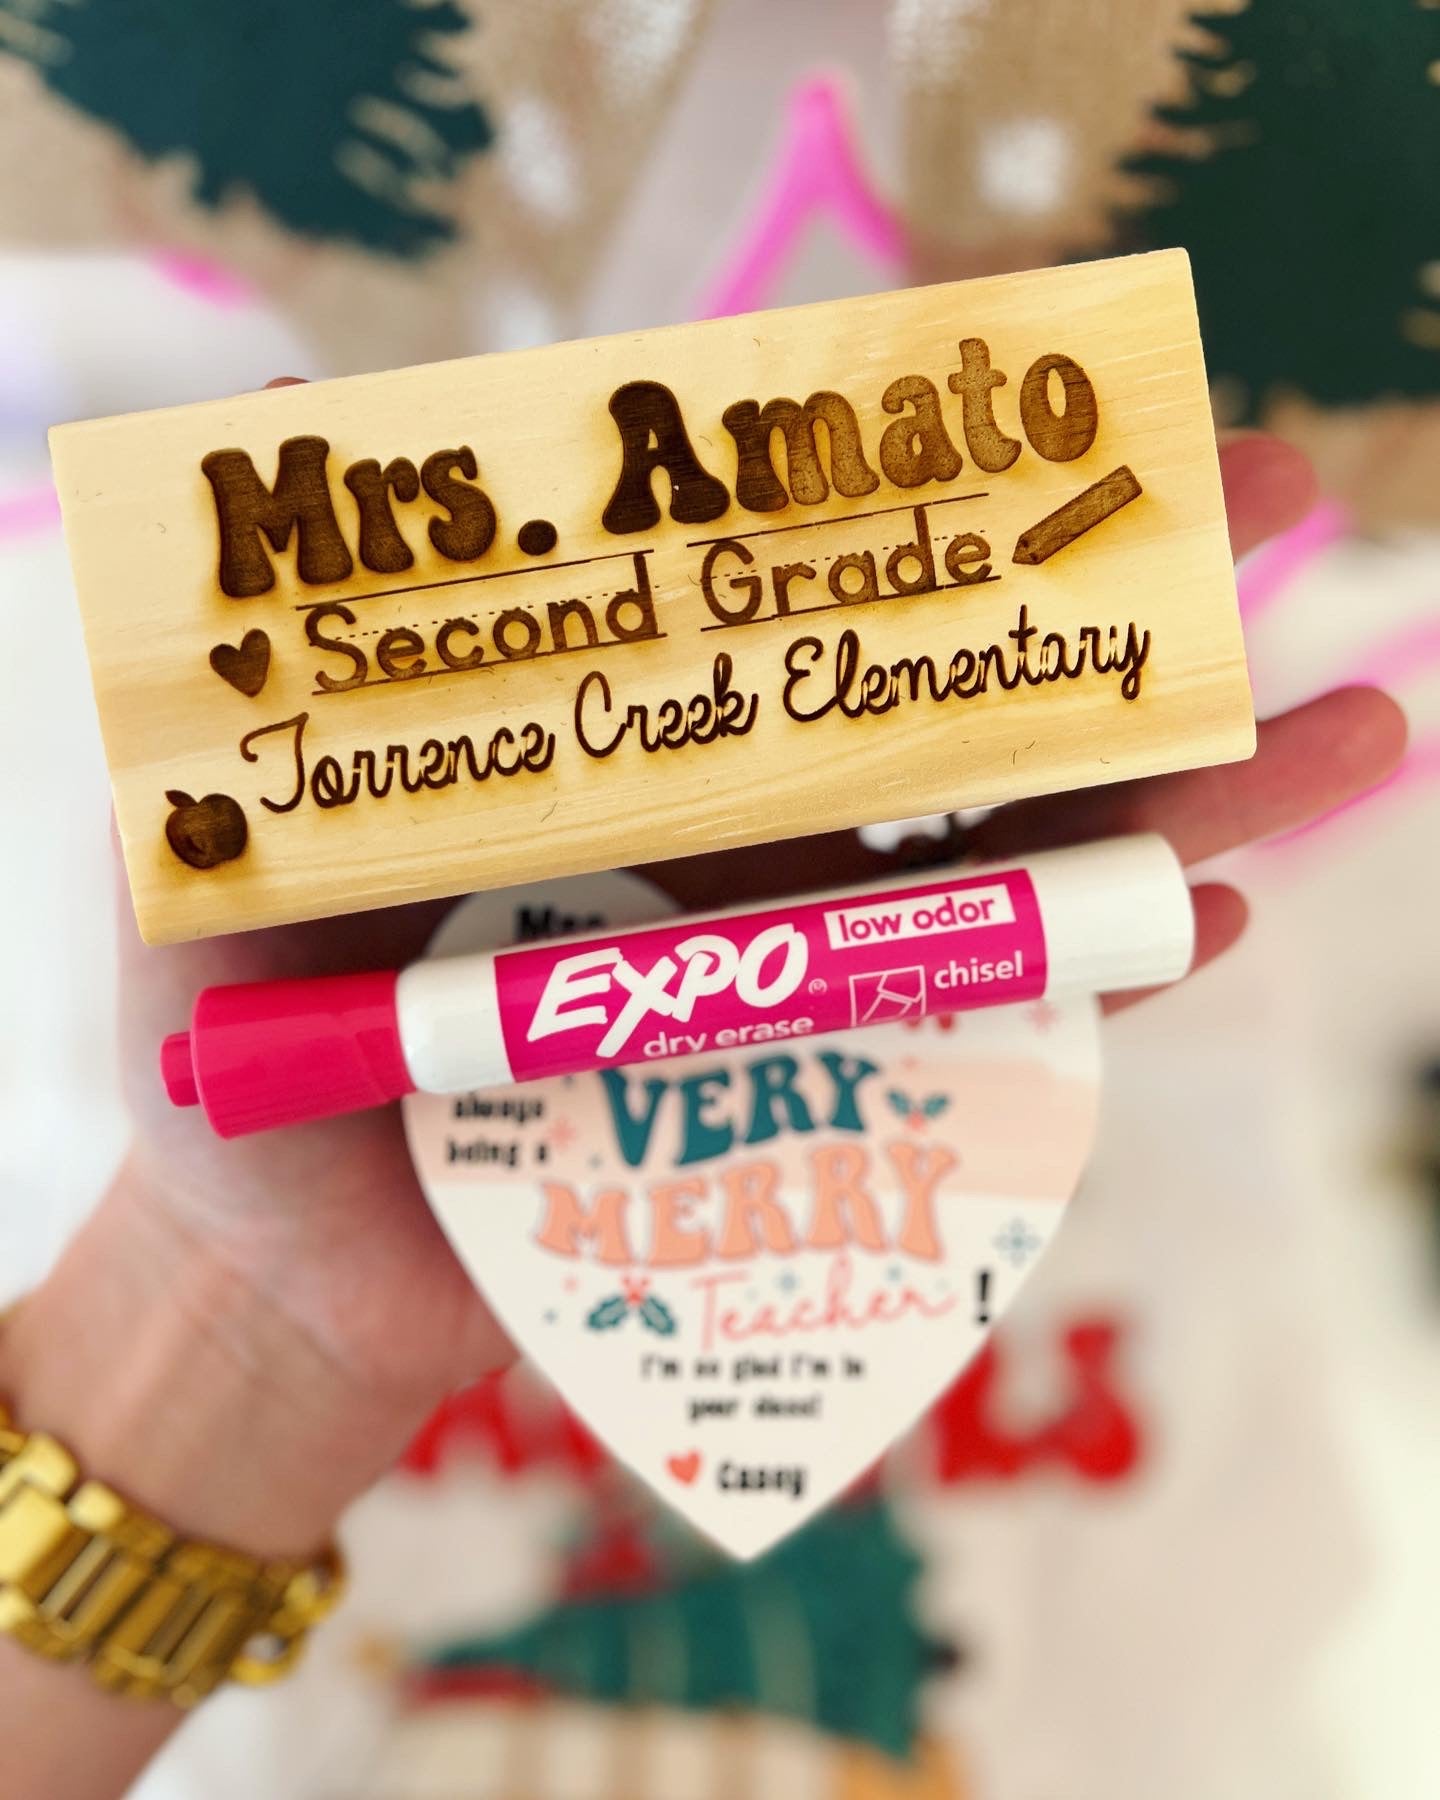 Personalized Engraved Whiteboard Eraser gift w/ Expo Marker, Personalized Christmas Card, Holographic cellophane gift bag tied with ribbon!